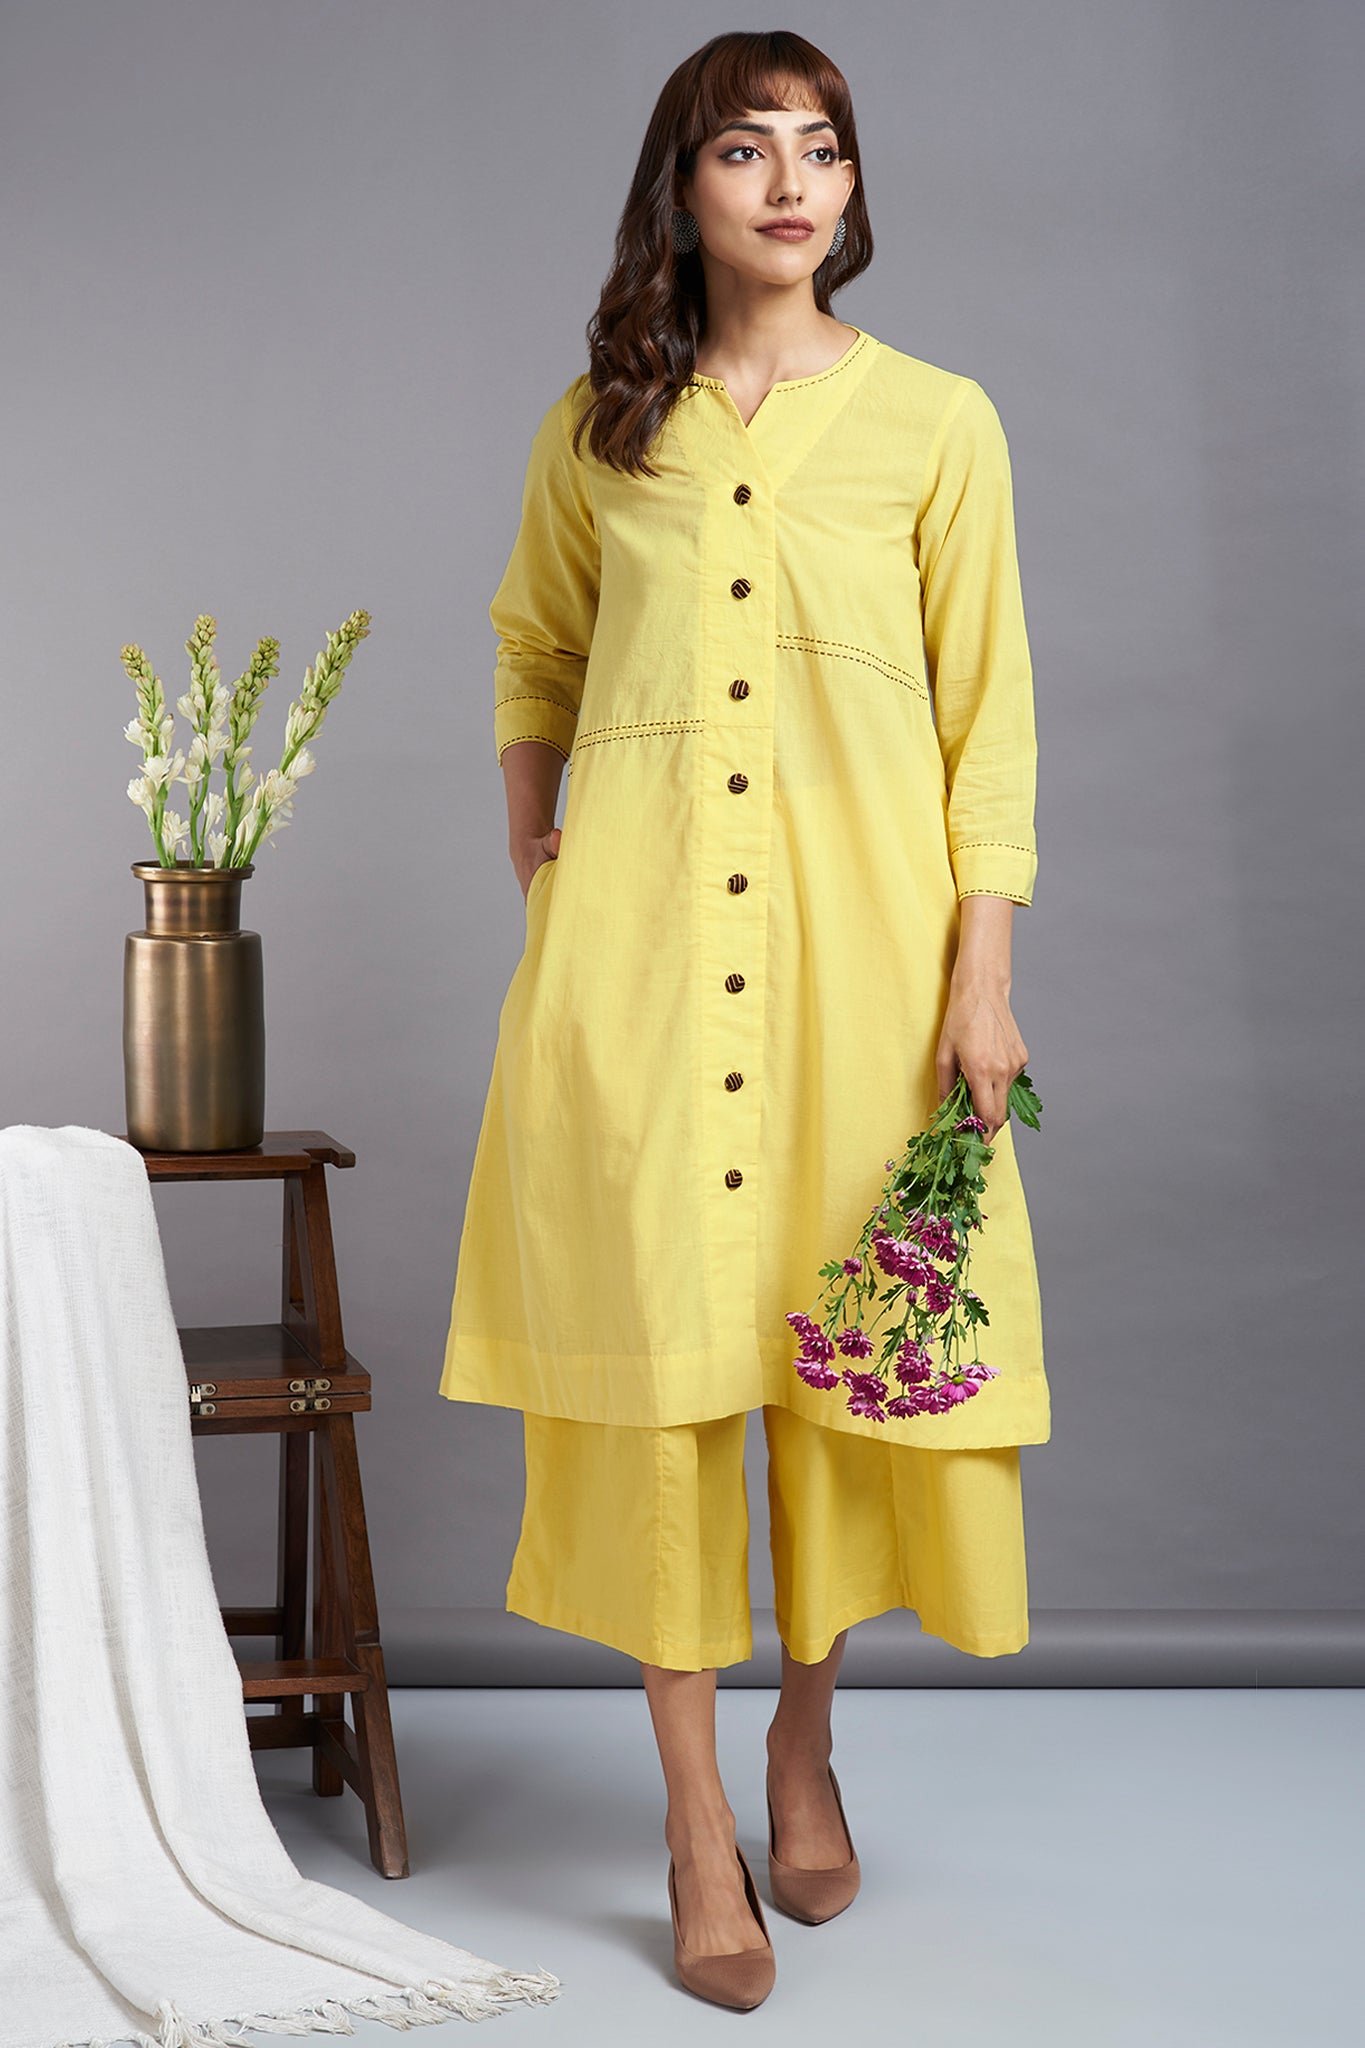 valley sun - button down tunic kurta with hand stitched details